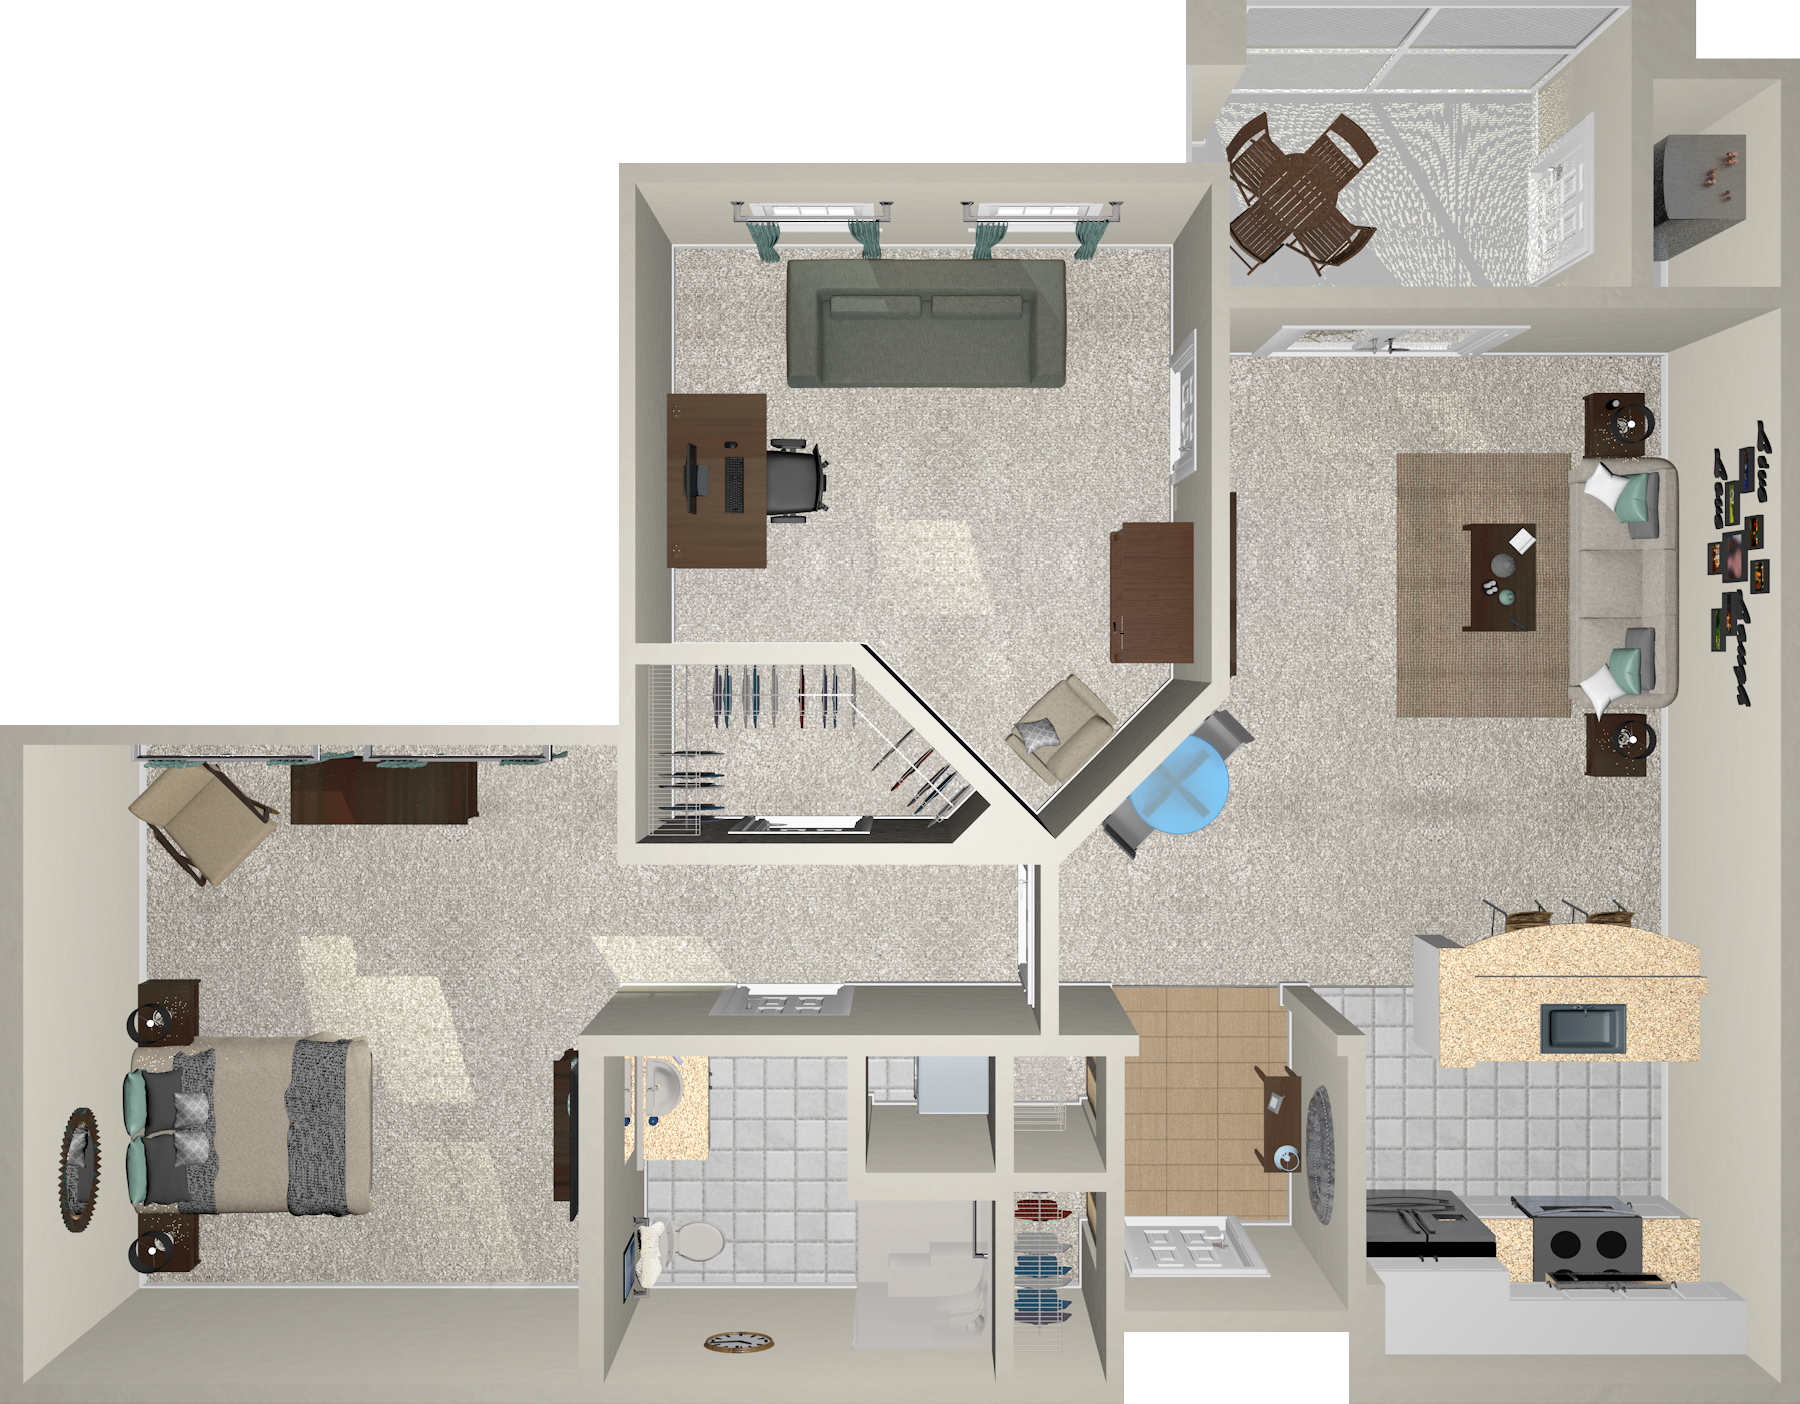 Interlude - One Bedroom with Den: 817 Sq. Ft.